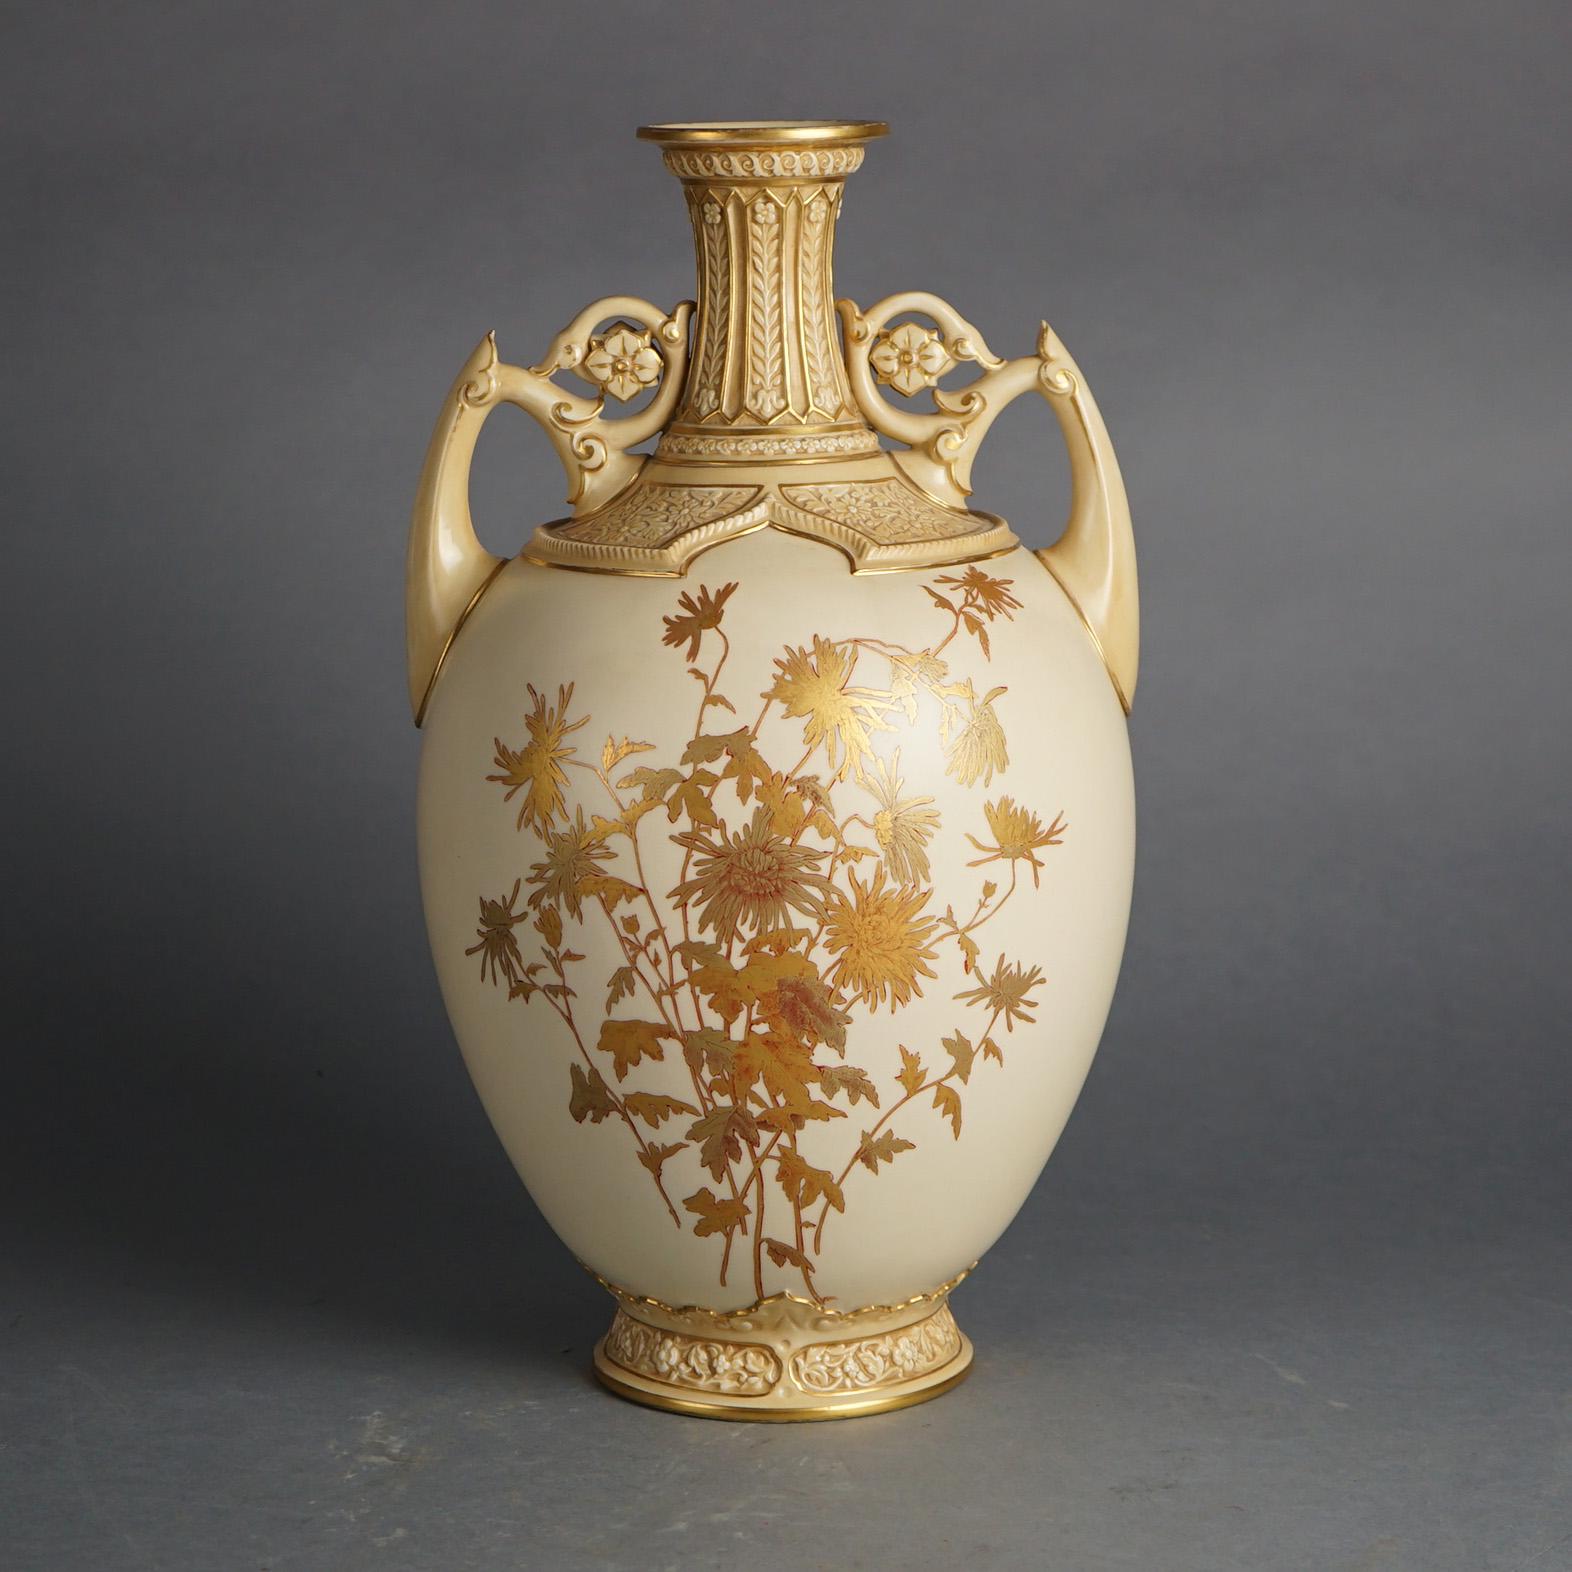 An antique English Royal Worcester vase offers porcelain construction with hand painted and gilt floral decoration, double foliate form handles and rosettes, maker mark on base as photographed, c1890

Measures - 16